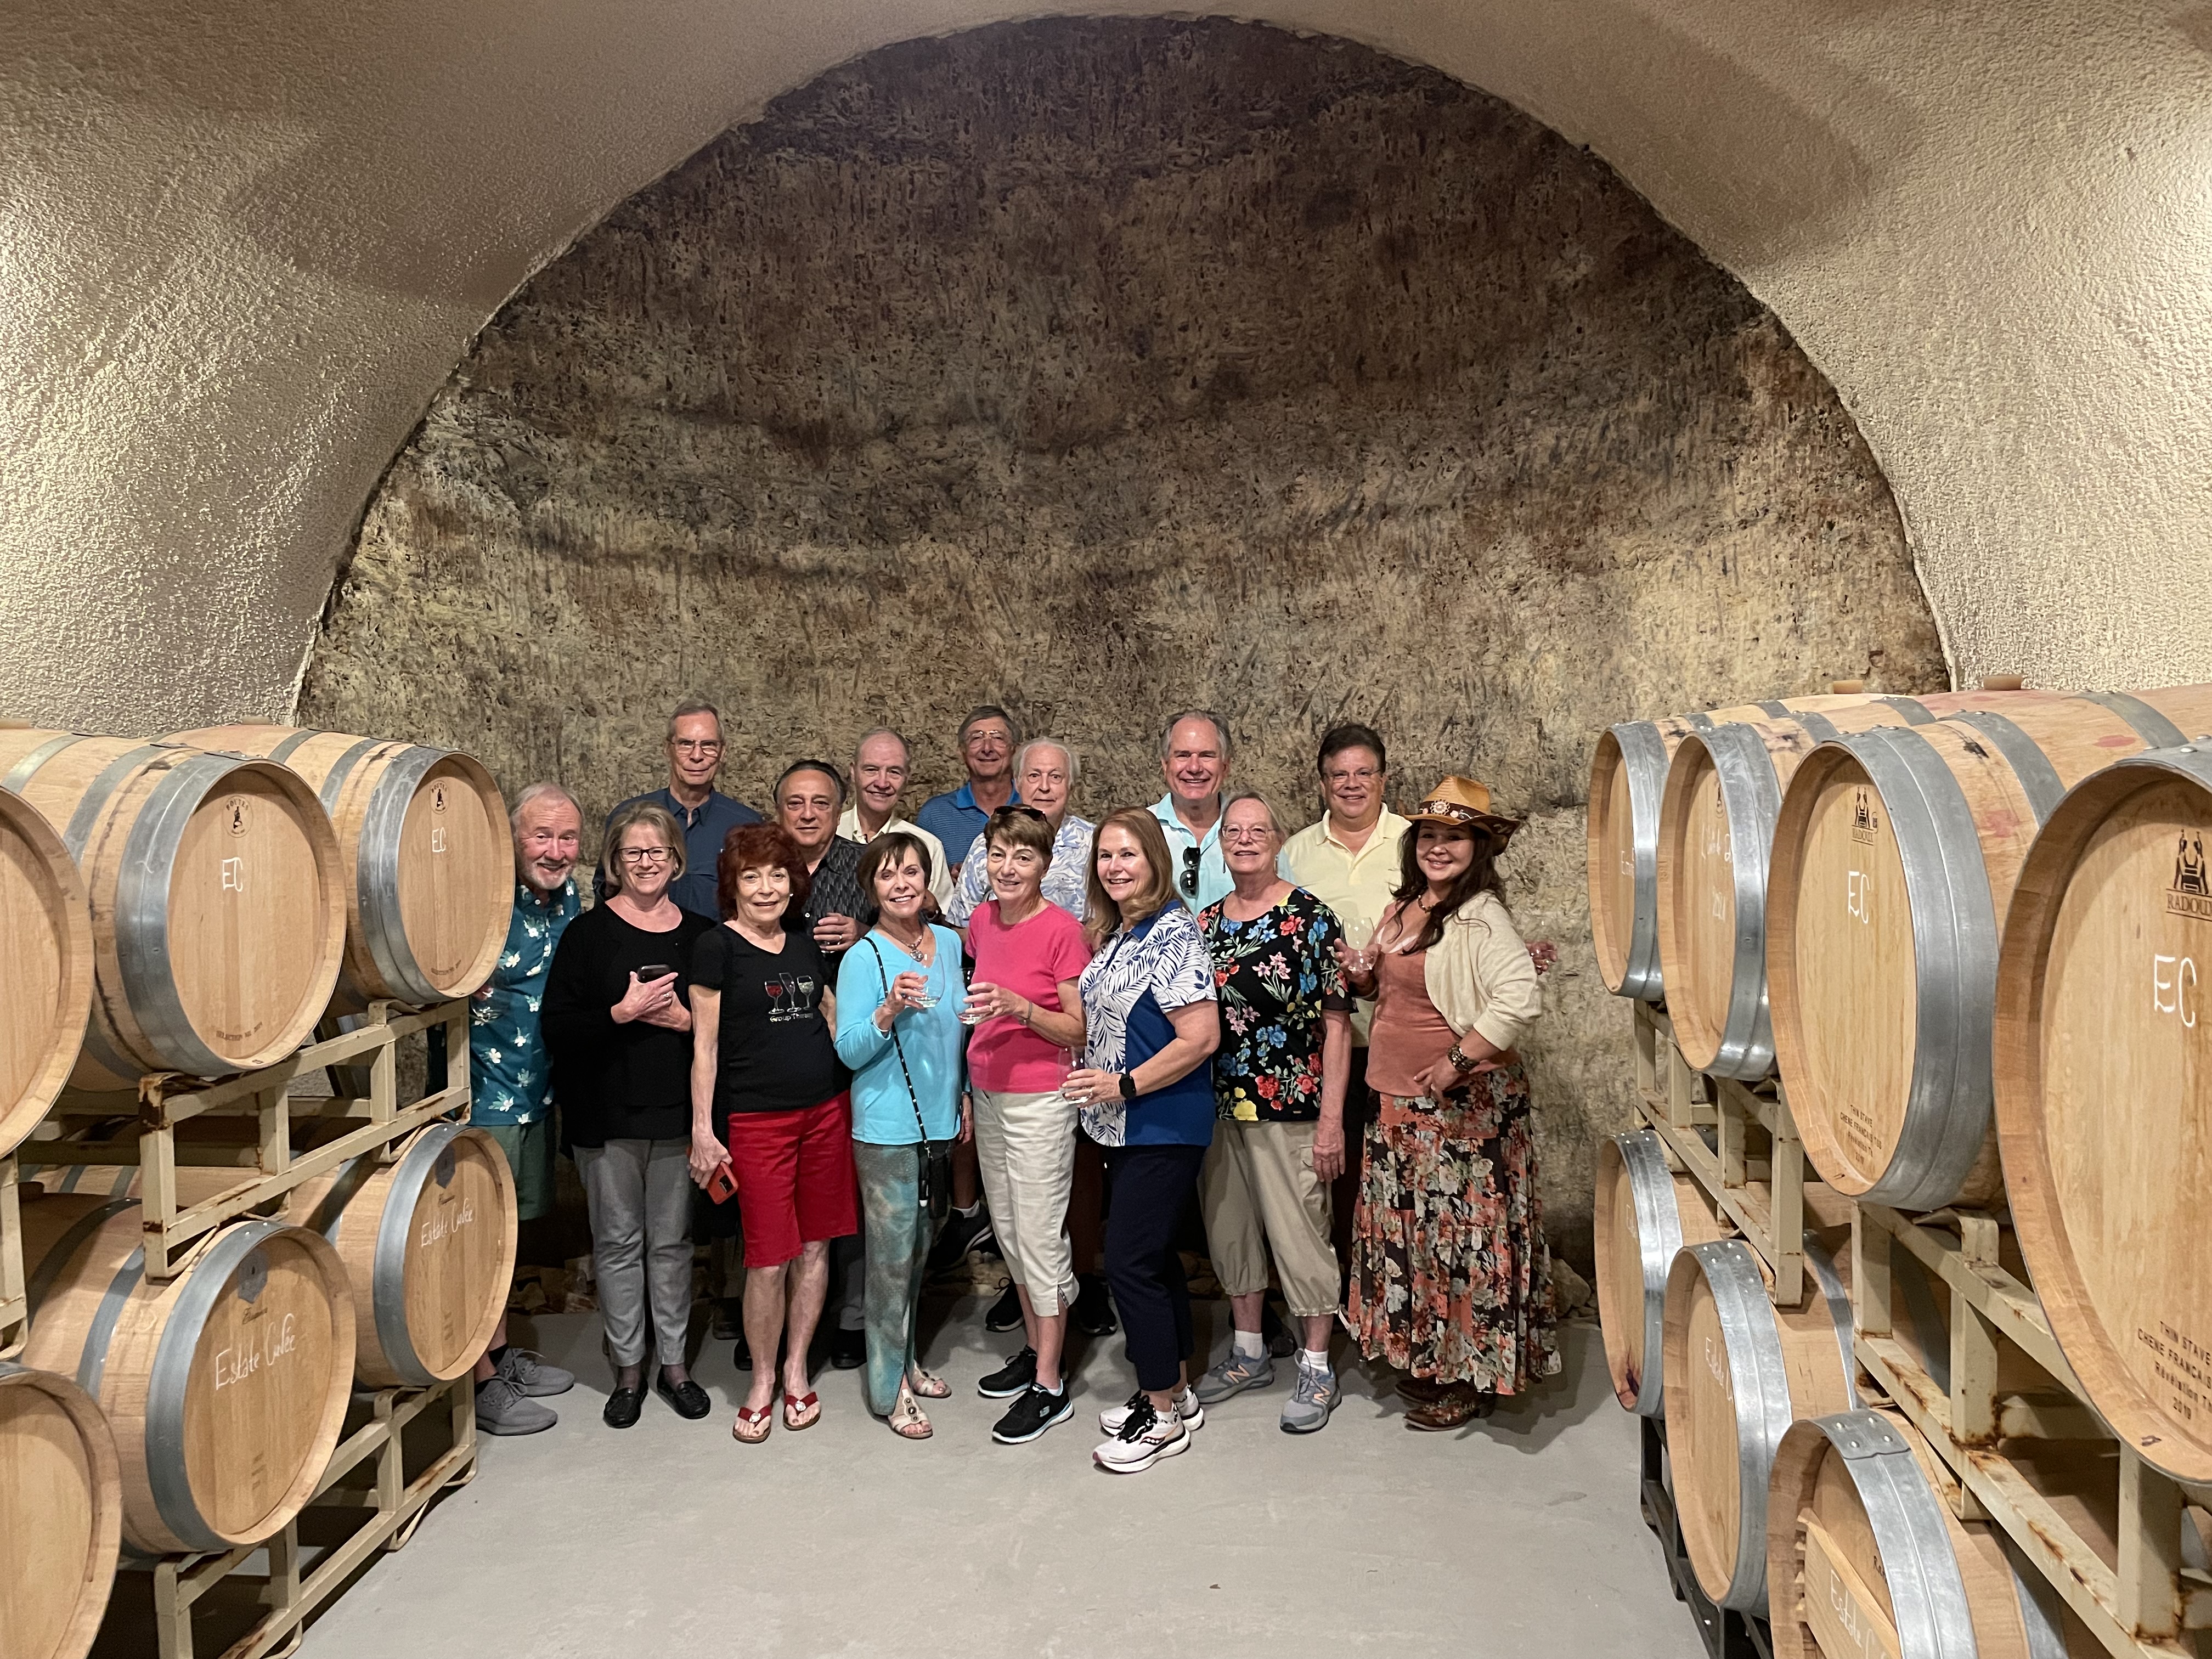 Posing for a group photo at L’Adventure Winery in Paso Robles.